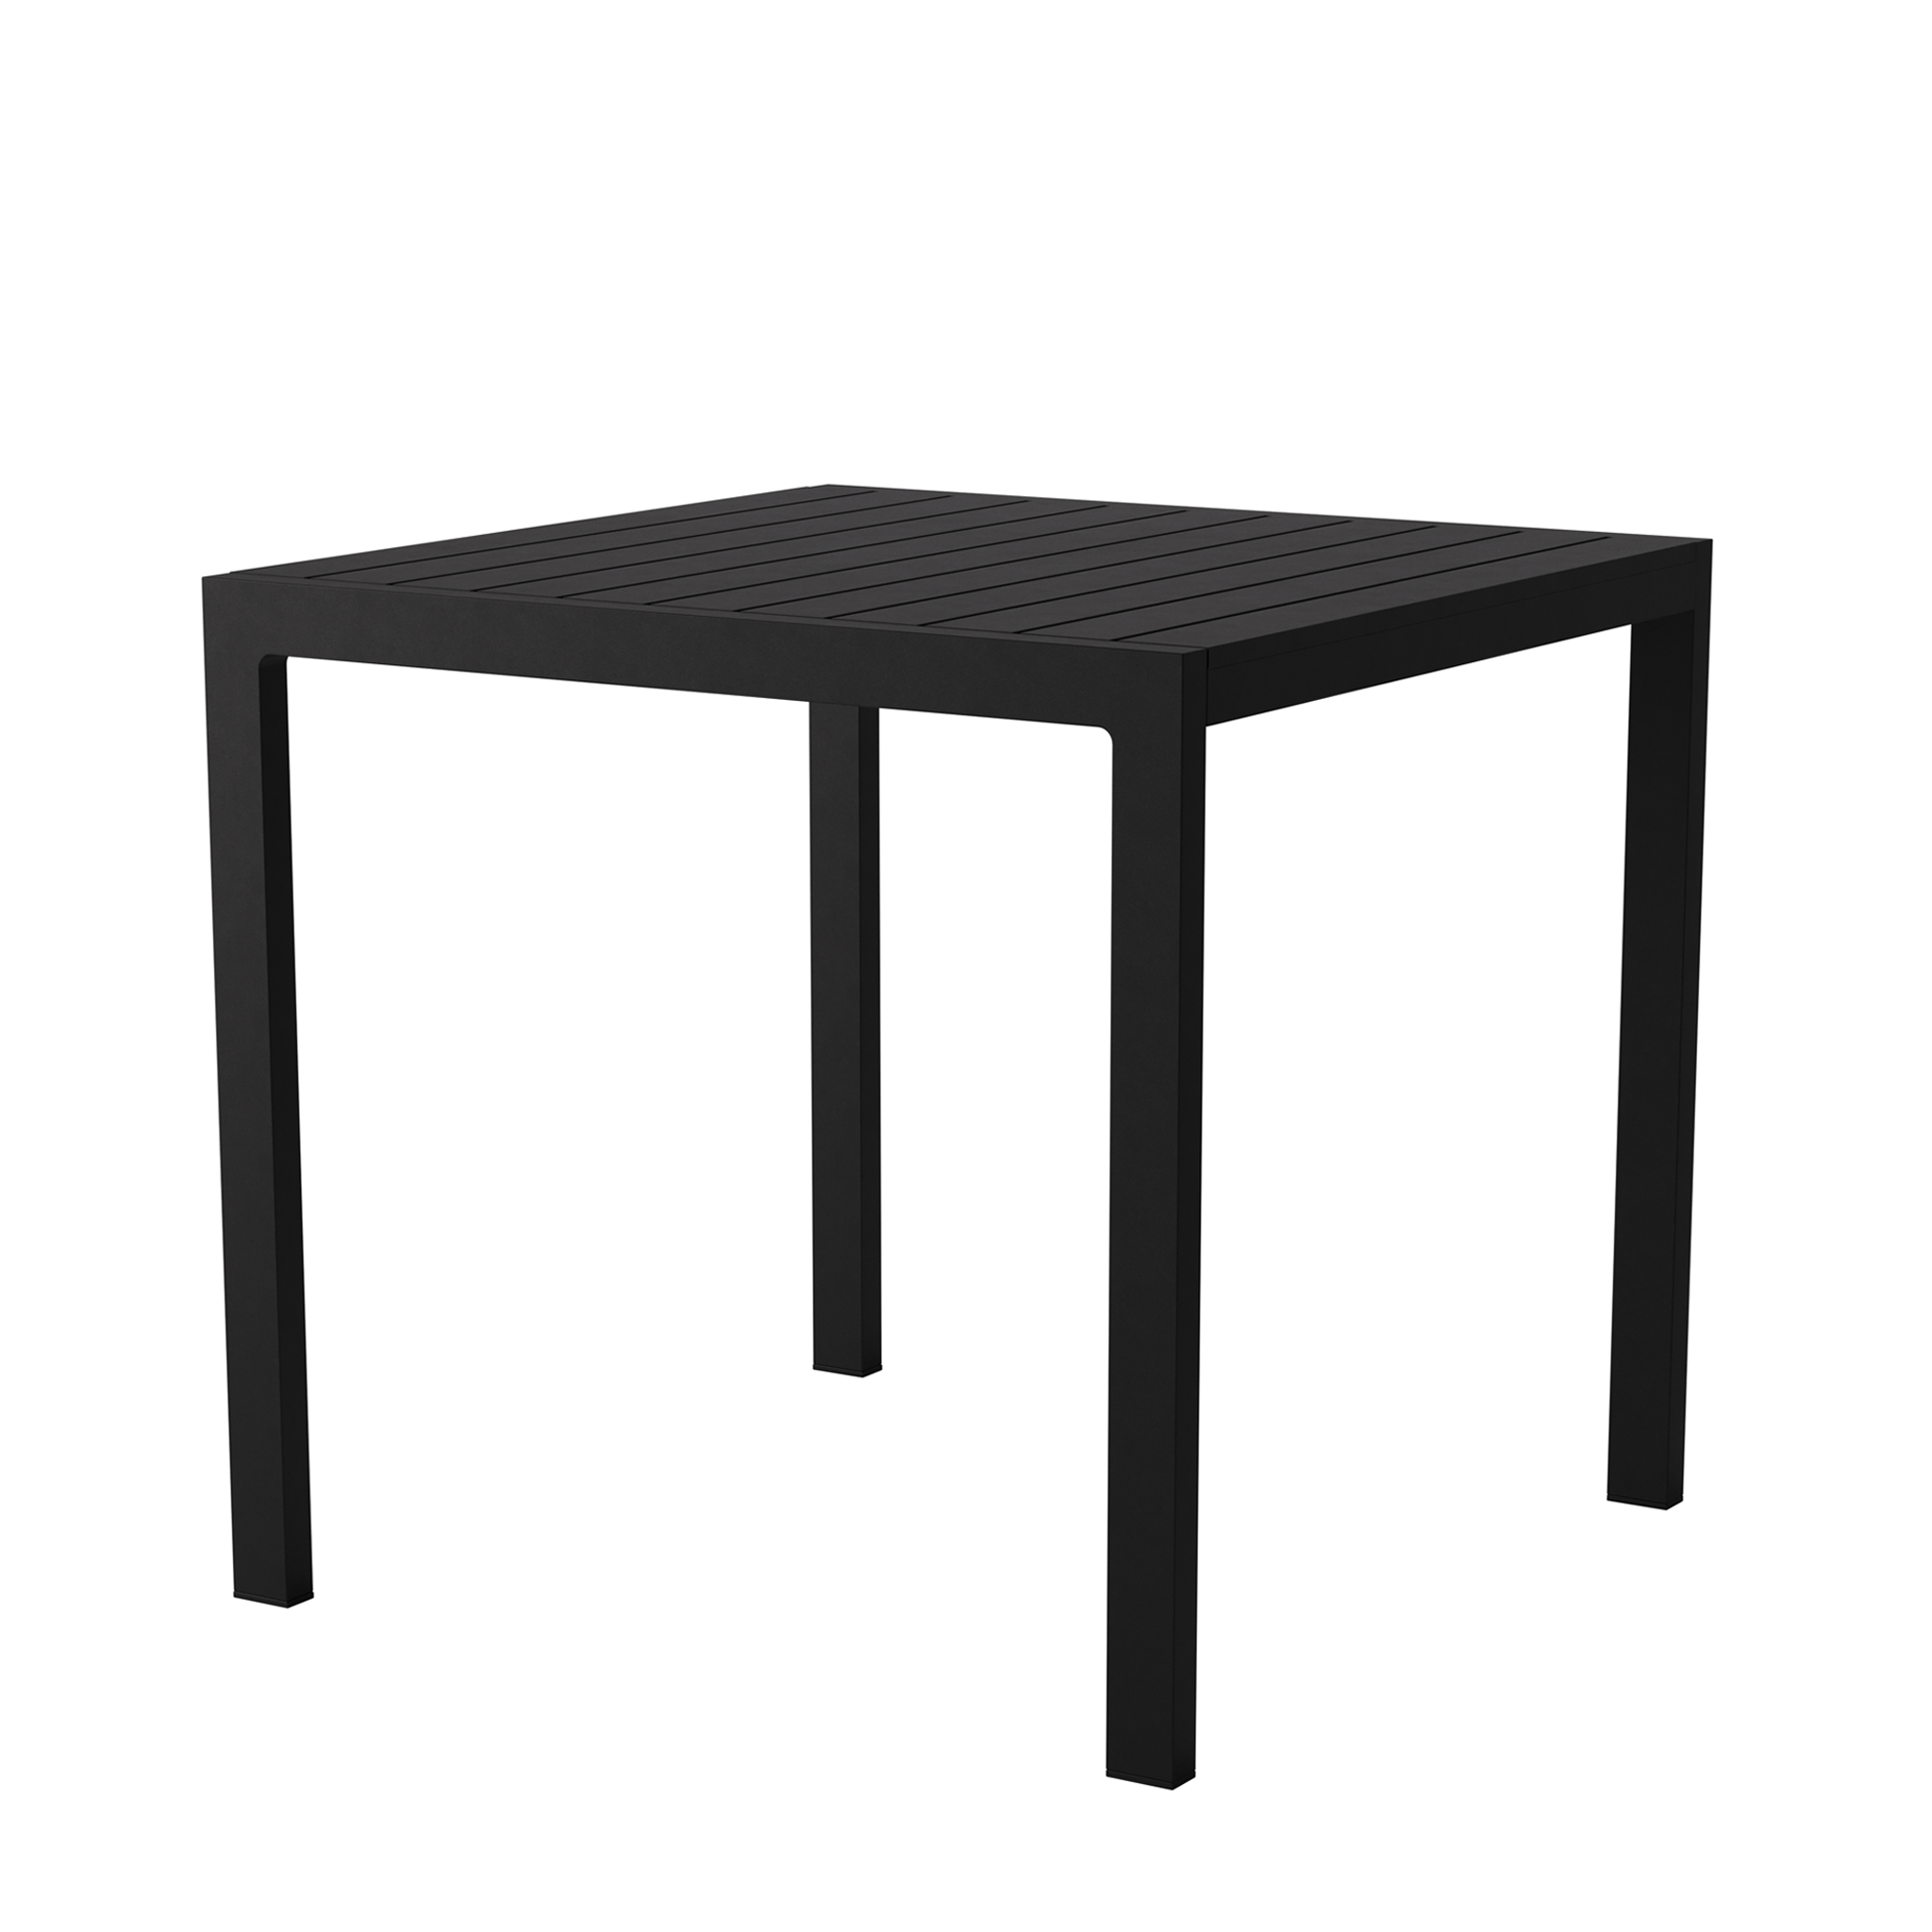 Eos Square table by Case